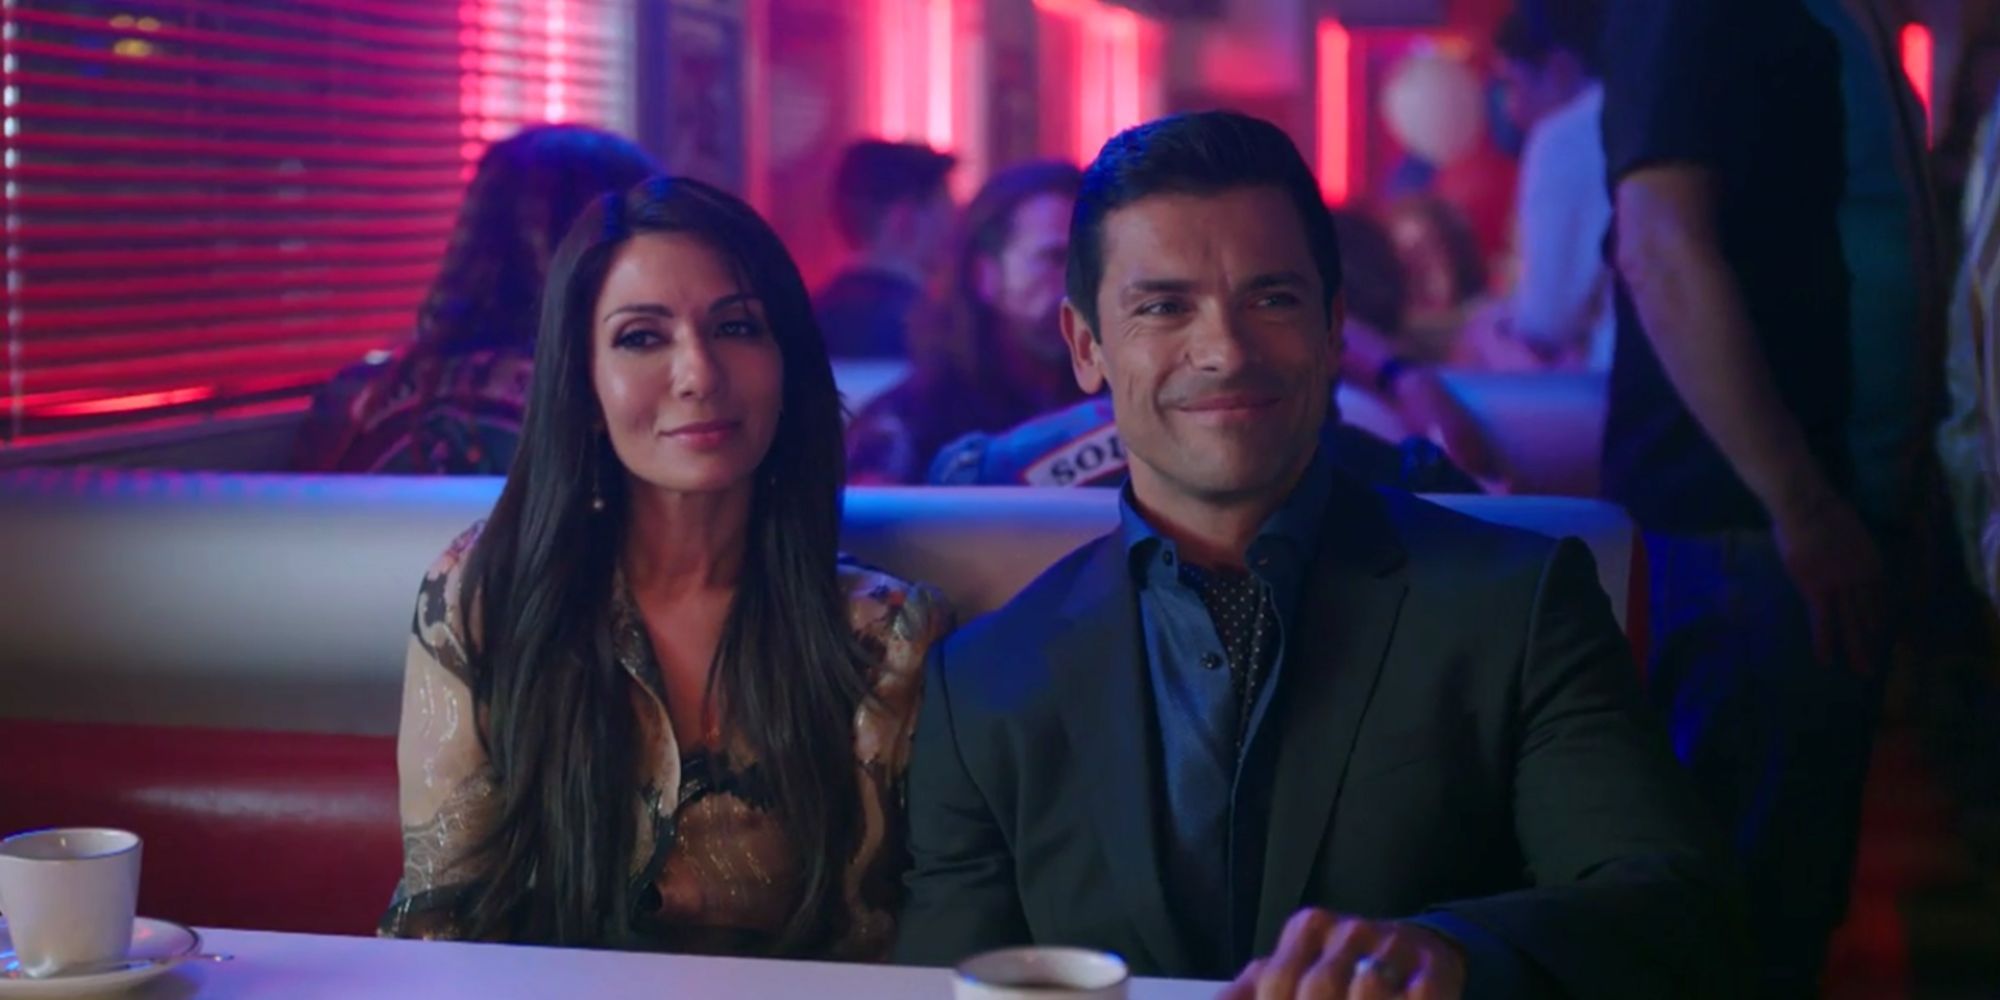 Hiram and Hermione Lodge at Pop's smiling in Riverdale